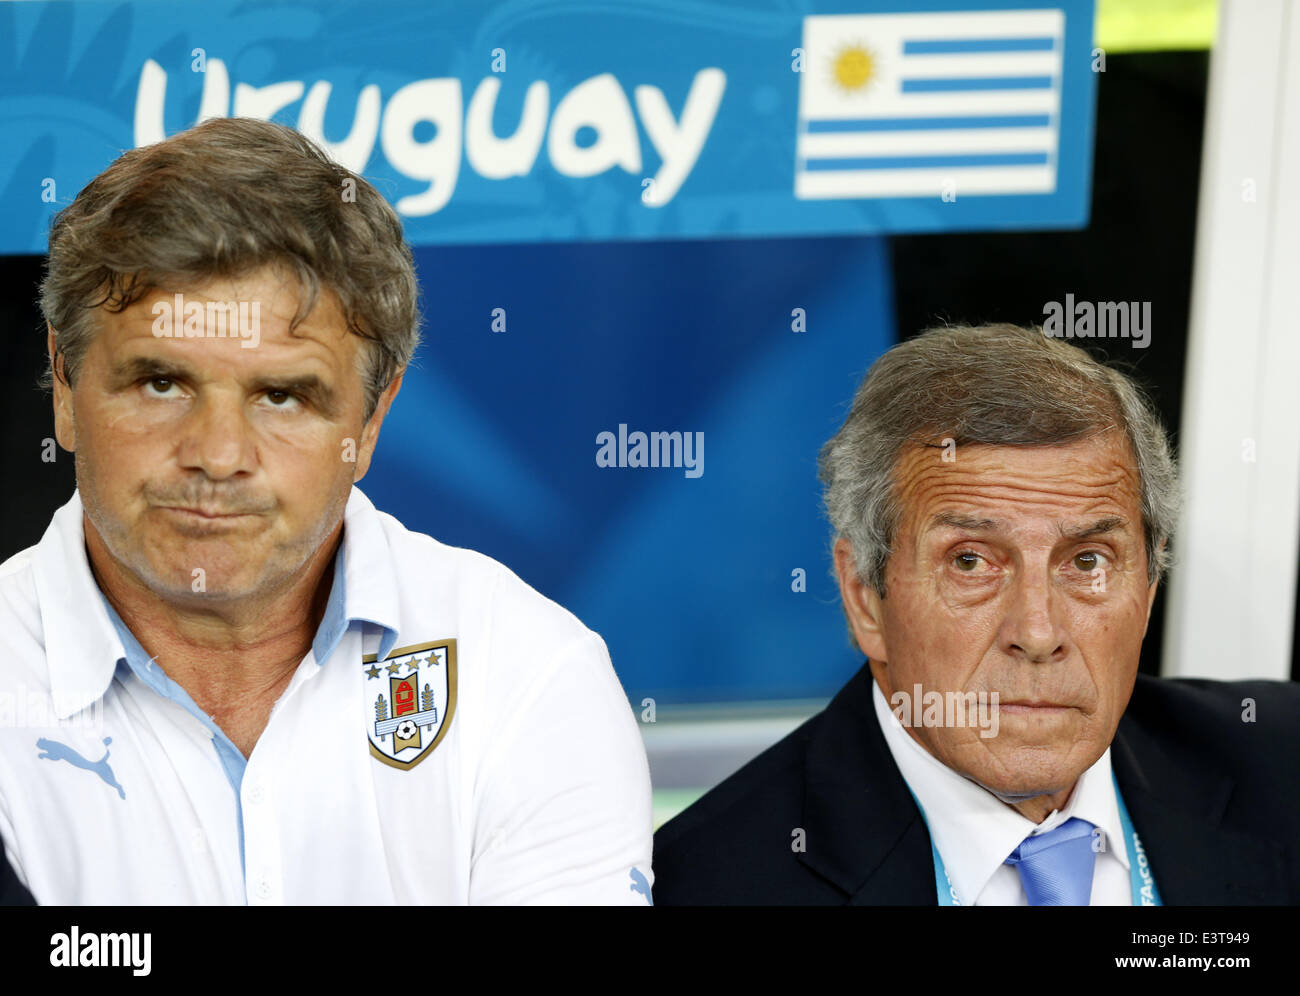 Rio De Janeiro, Brazil. 28th June, 2014. Uruguay's coach Oscar Washington Tabarez (R) looks on during a Round of 16 match between Colombia and Uruguay of 2014 FIFA World Cup at the Estadio do Maracana Stadium in Rio de Janeiro, Brazil, on June 28, 2014. Colombia won 2-0 over Uruguay and qualified for Quarter-finals on Saturday. Credit:  Wang Lili/Xinhua/Alamy Live News Stock Photo